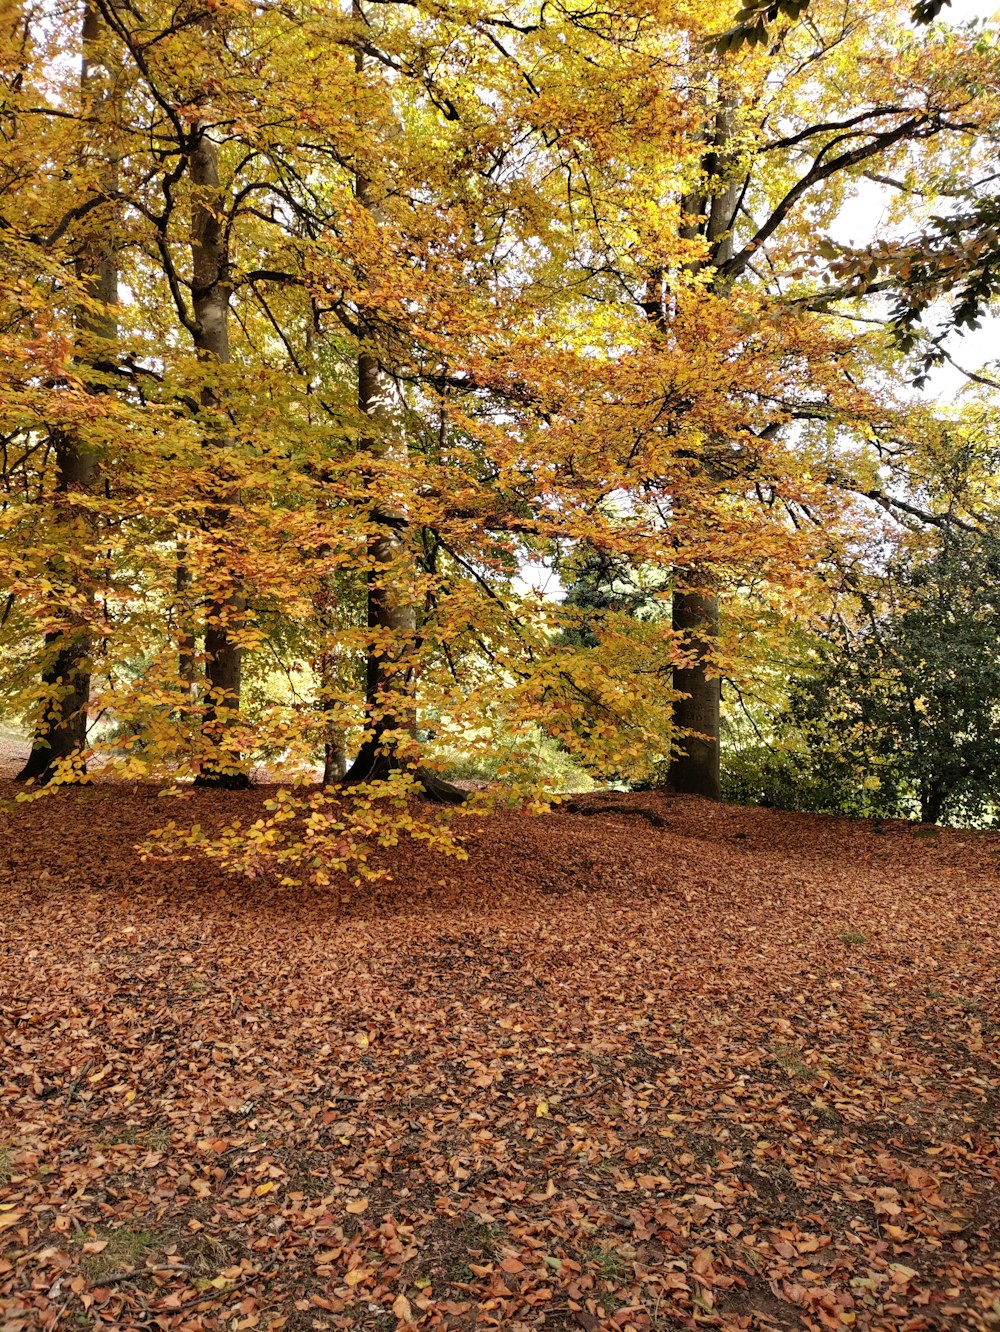 a group of trees with yellow leaves on the ground